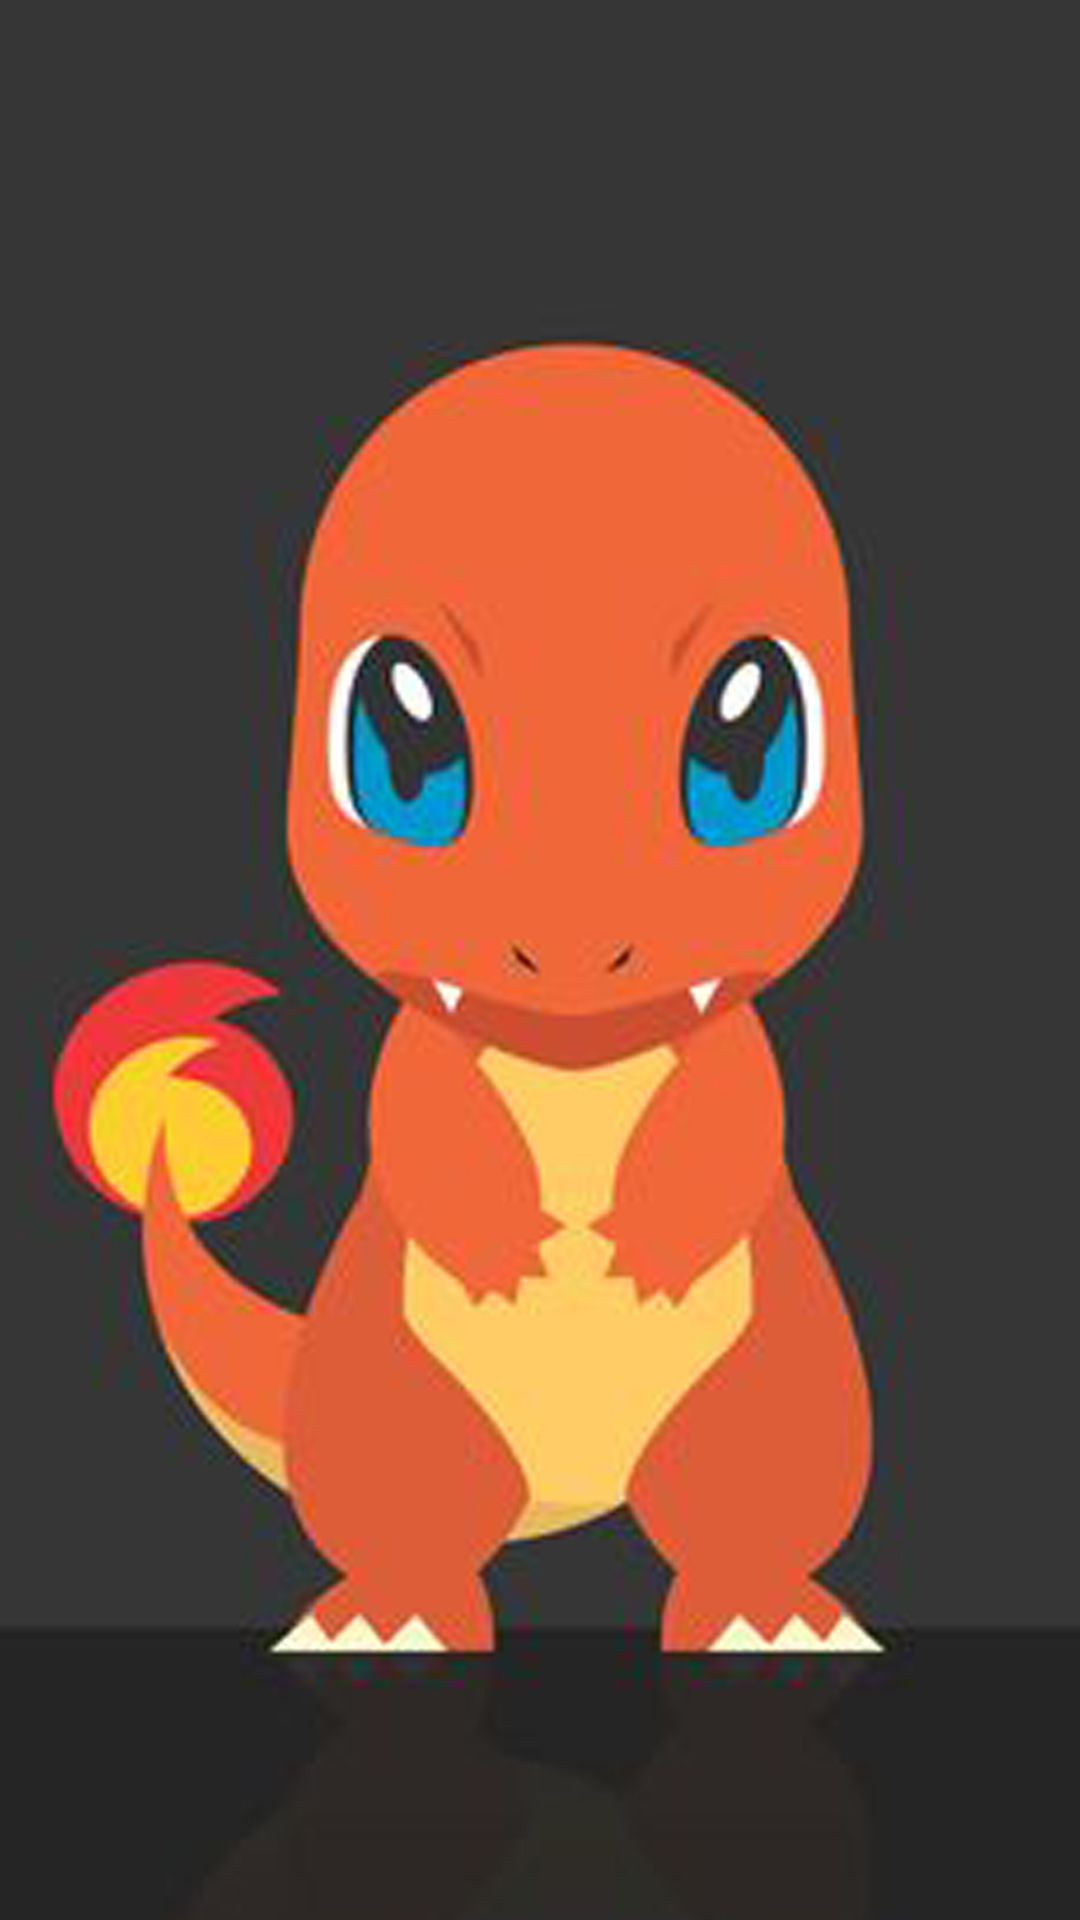 Free download Charmander Pokemon Go HomeScreen iPhone Wallpaper iPhone [1080x1920] for your Desktop, Mobile & Tablet. Explore Charmander Wallpaper. Squirtle Wallpaper, Charizard Wallpaper, Mega Charizard X Wallpaper